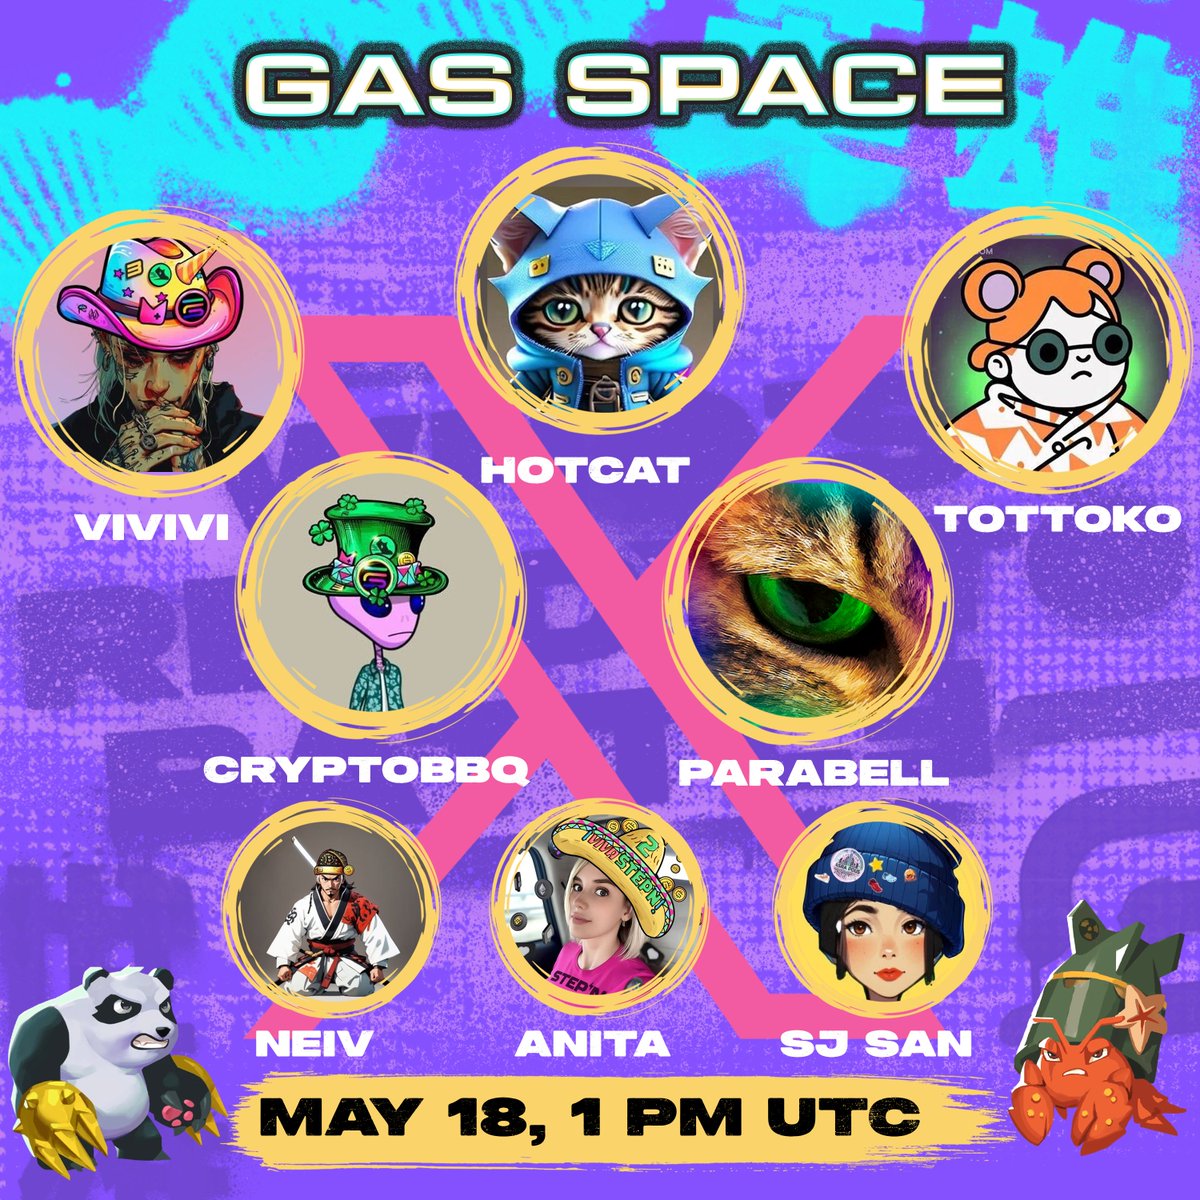 ⚔️A VERY SPECIAL GAS SPACE⚔️ 🎙️Join our Gas Space with the players from the Japanese Community and amazing @1235_sj who will support us with translation. 🔎We will explore how players of different levels overcome challenges and develop inside the game, what are the key